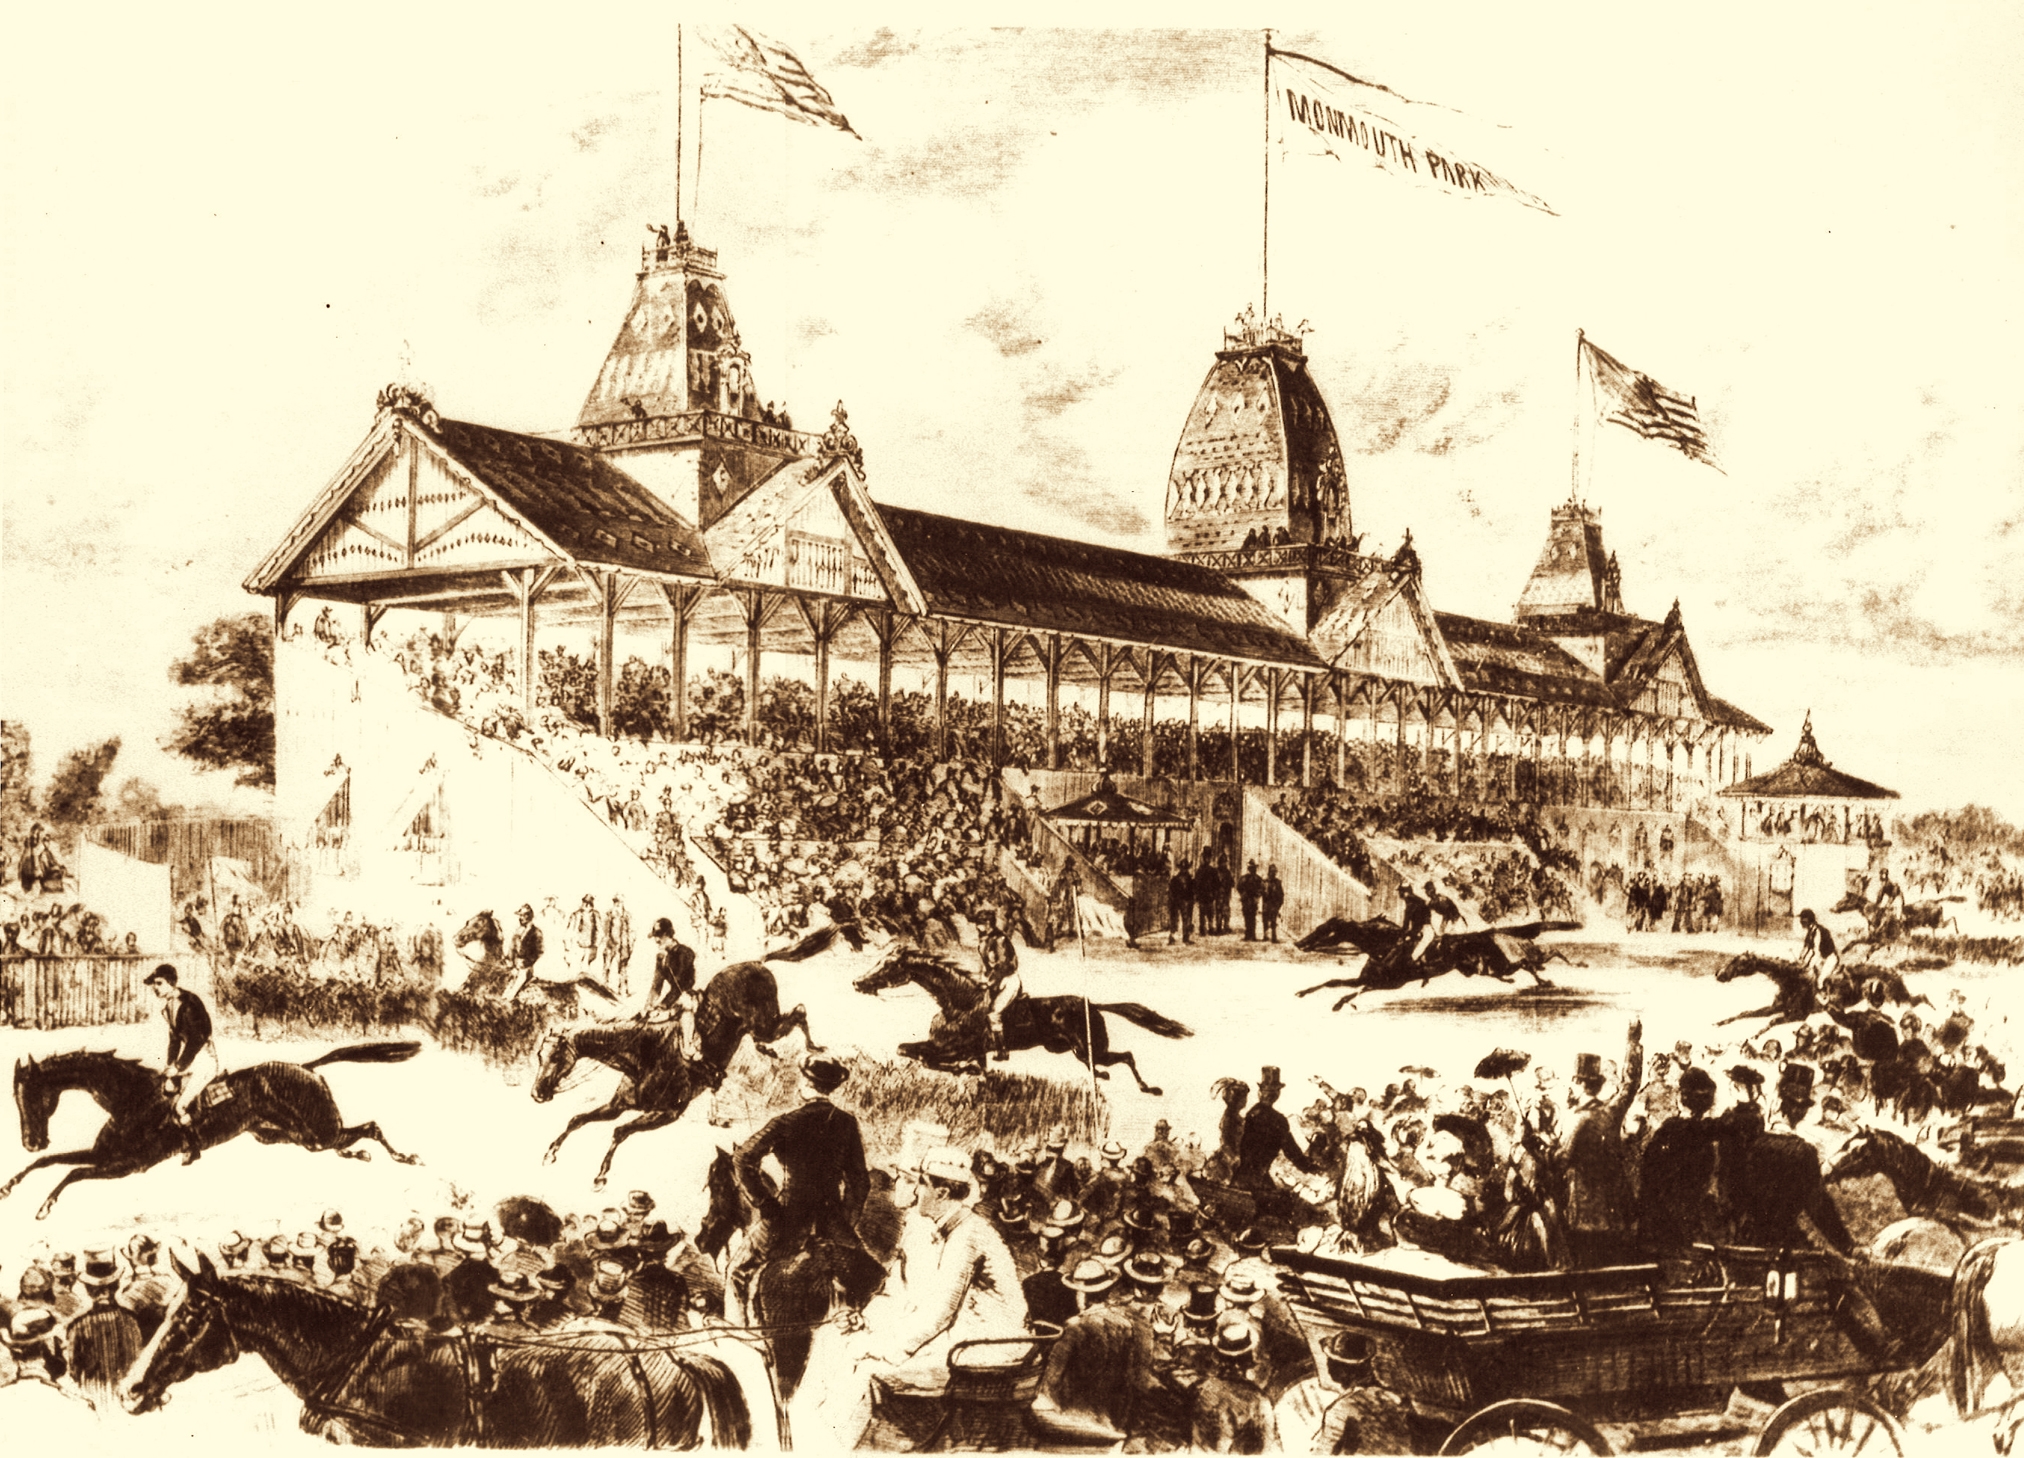 Graphic Illustration of Monmouth Park in Oceanport NJ from early 1900